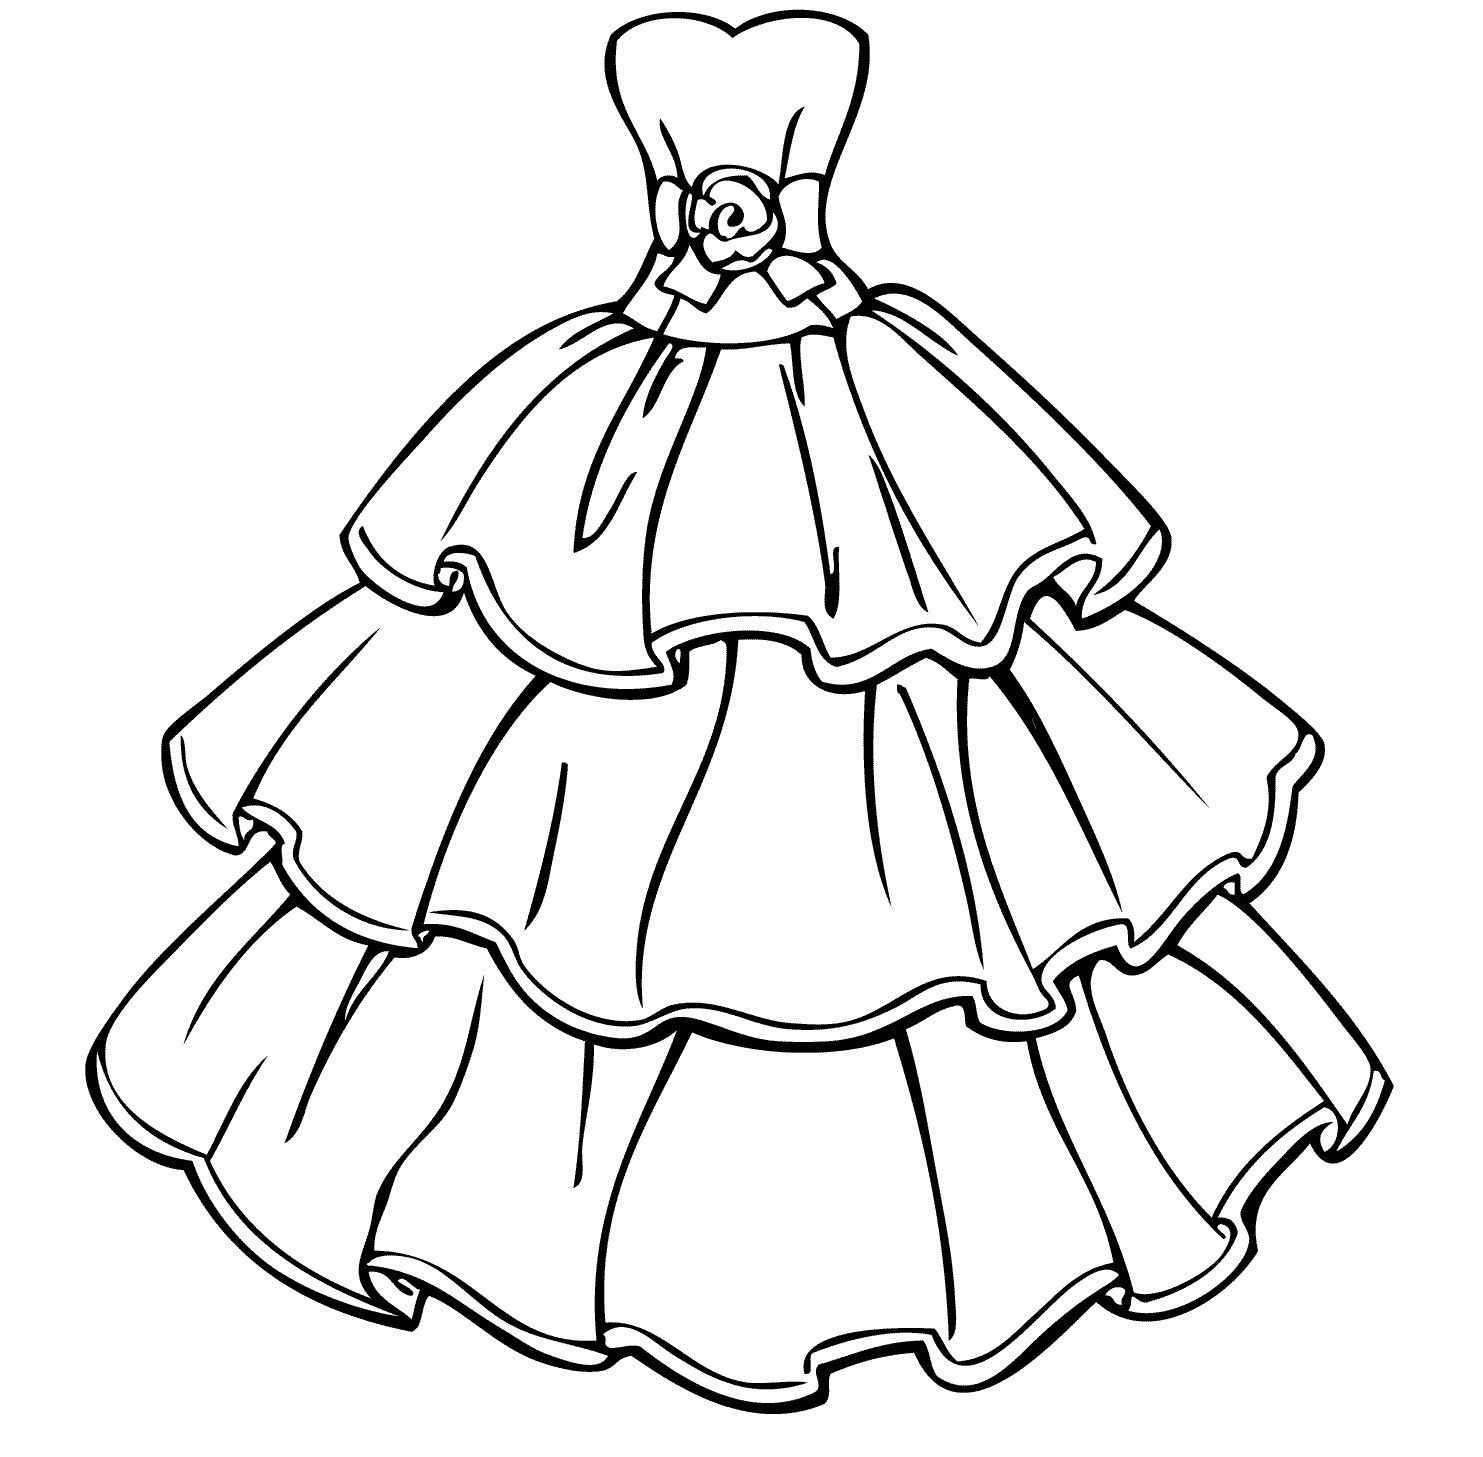 Pack Of Princess Dress Coloring Pages   Dresses Coloring Pages ...